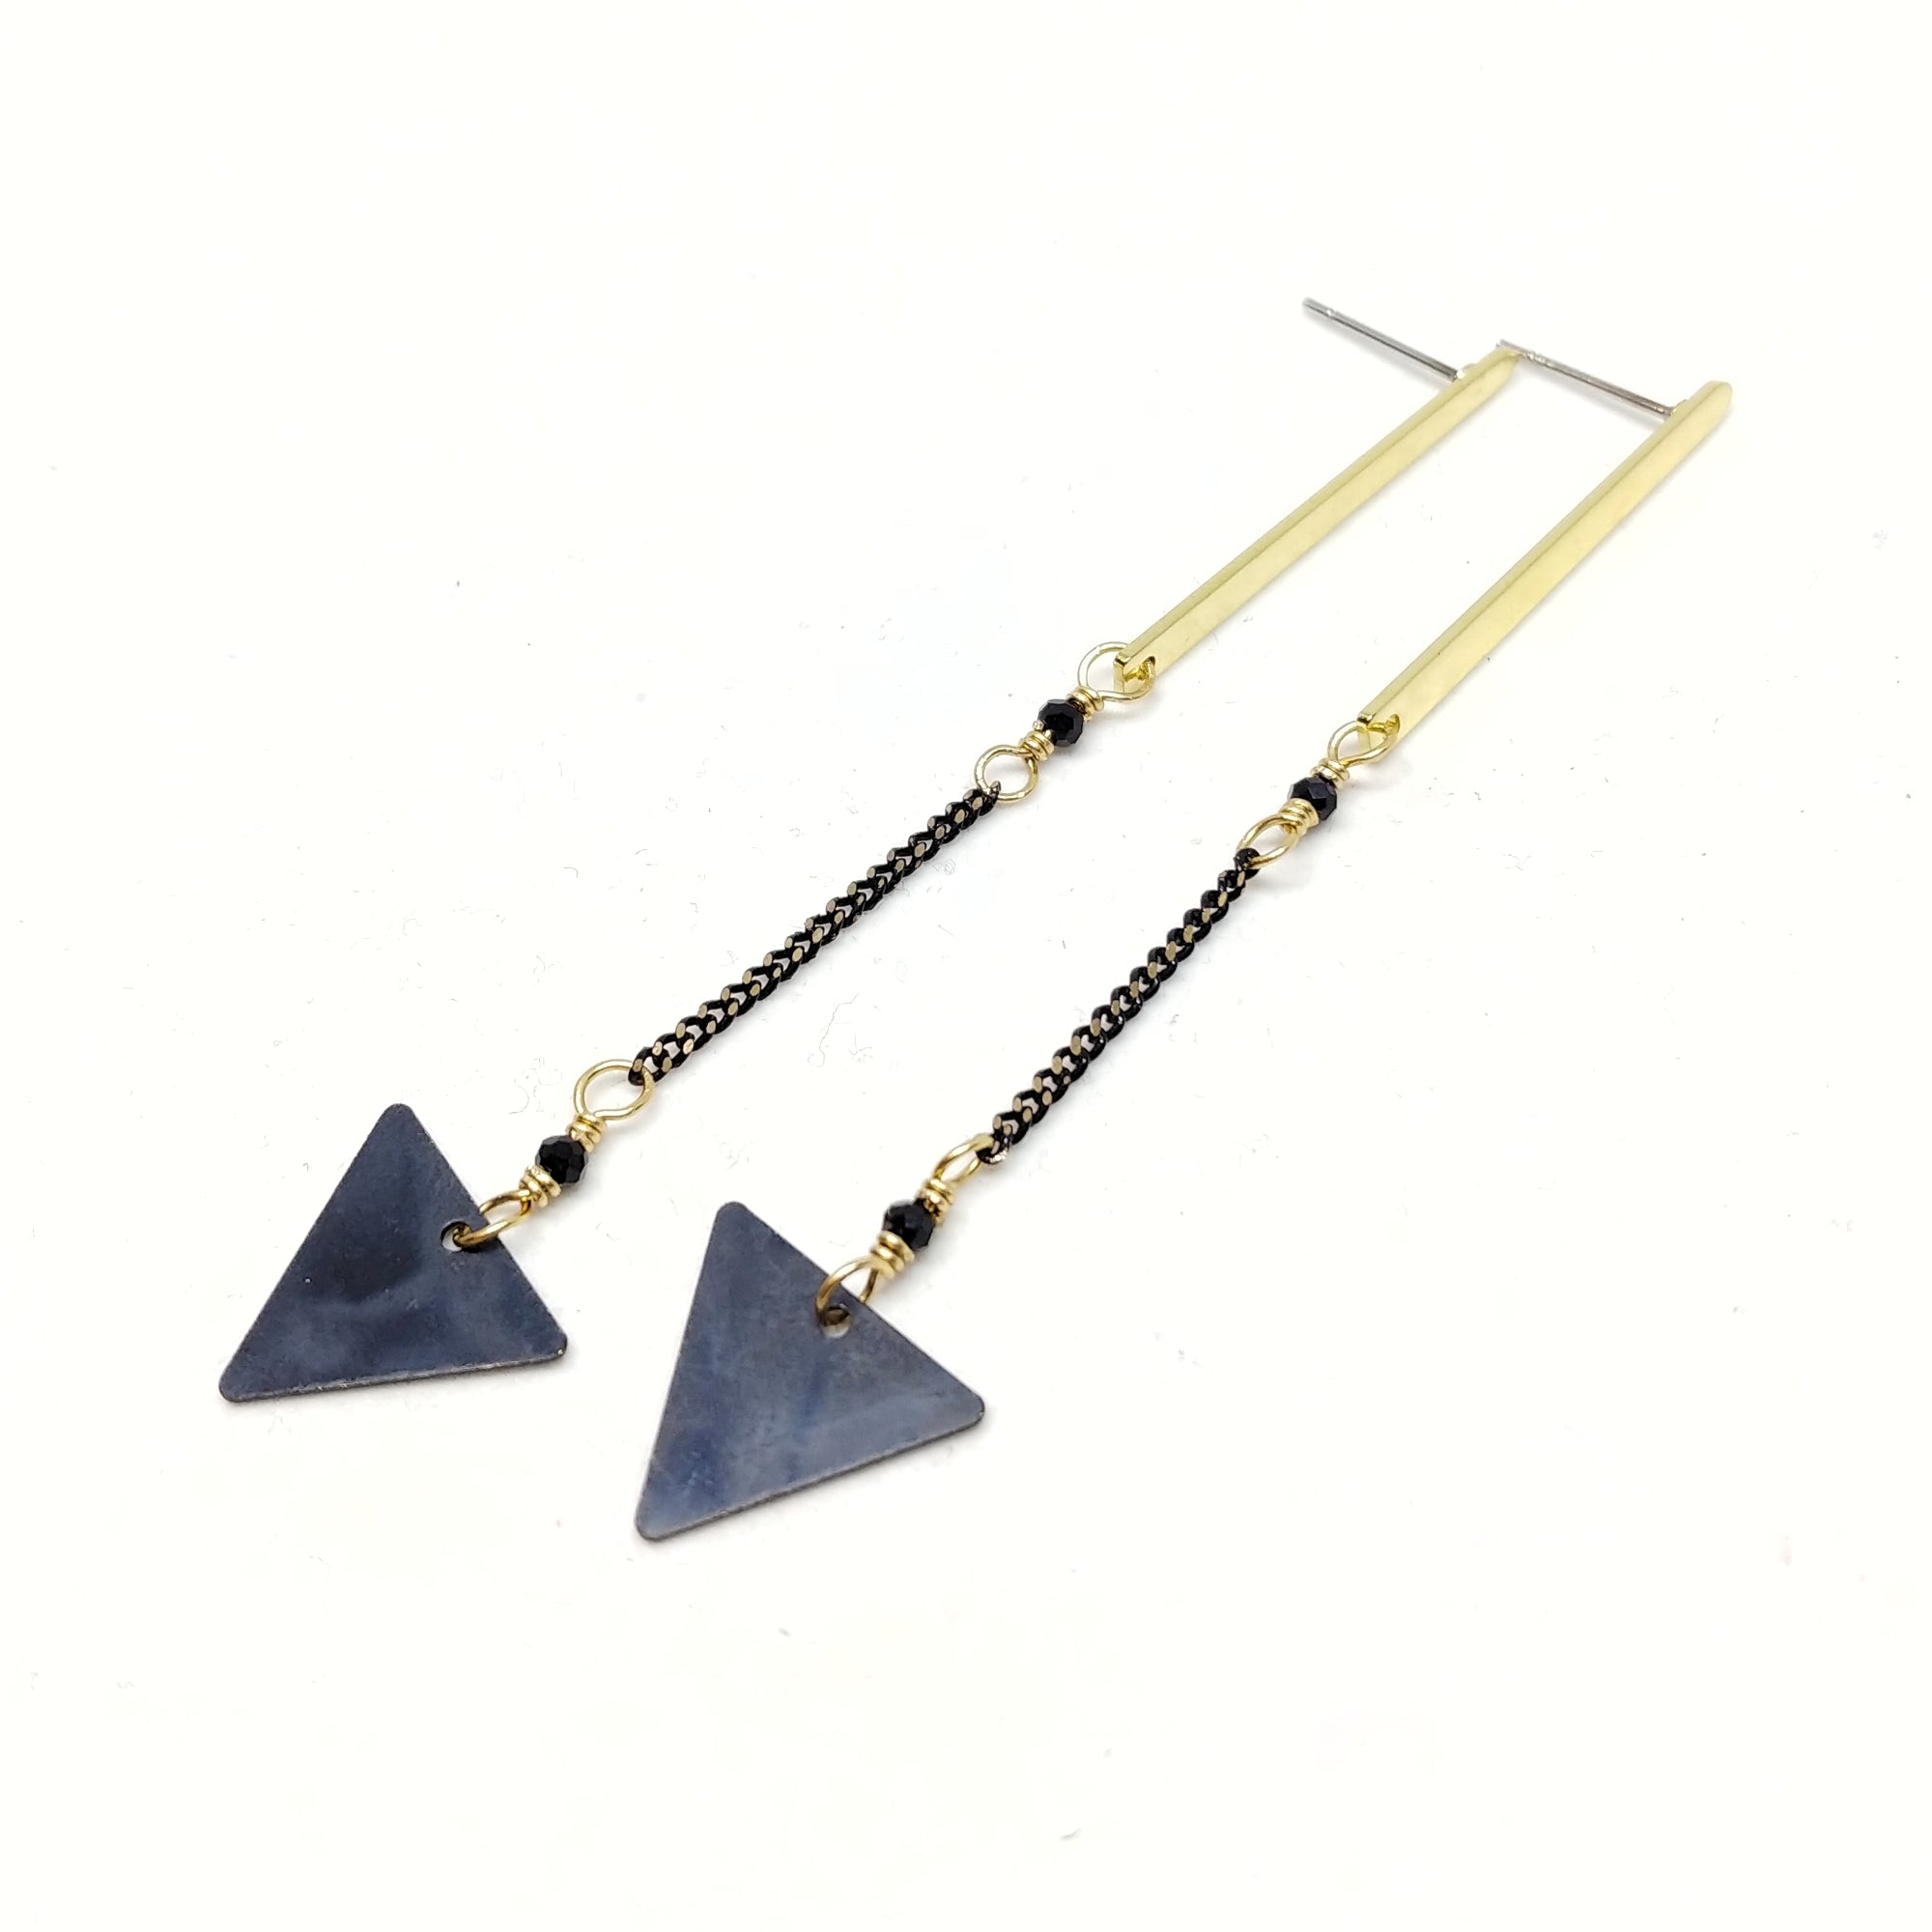 82mm raw brass long bar studs with black crystals, oxidized black brass chain and triangle charms.